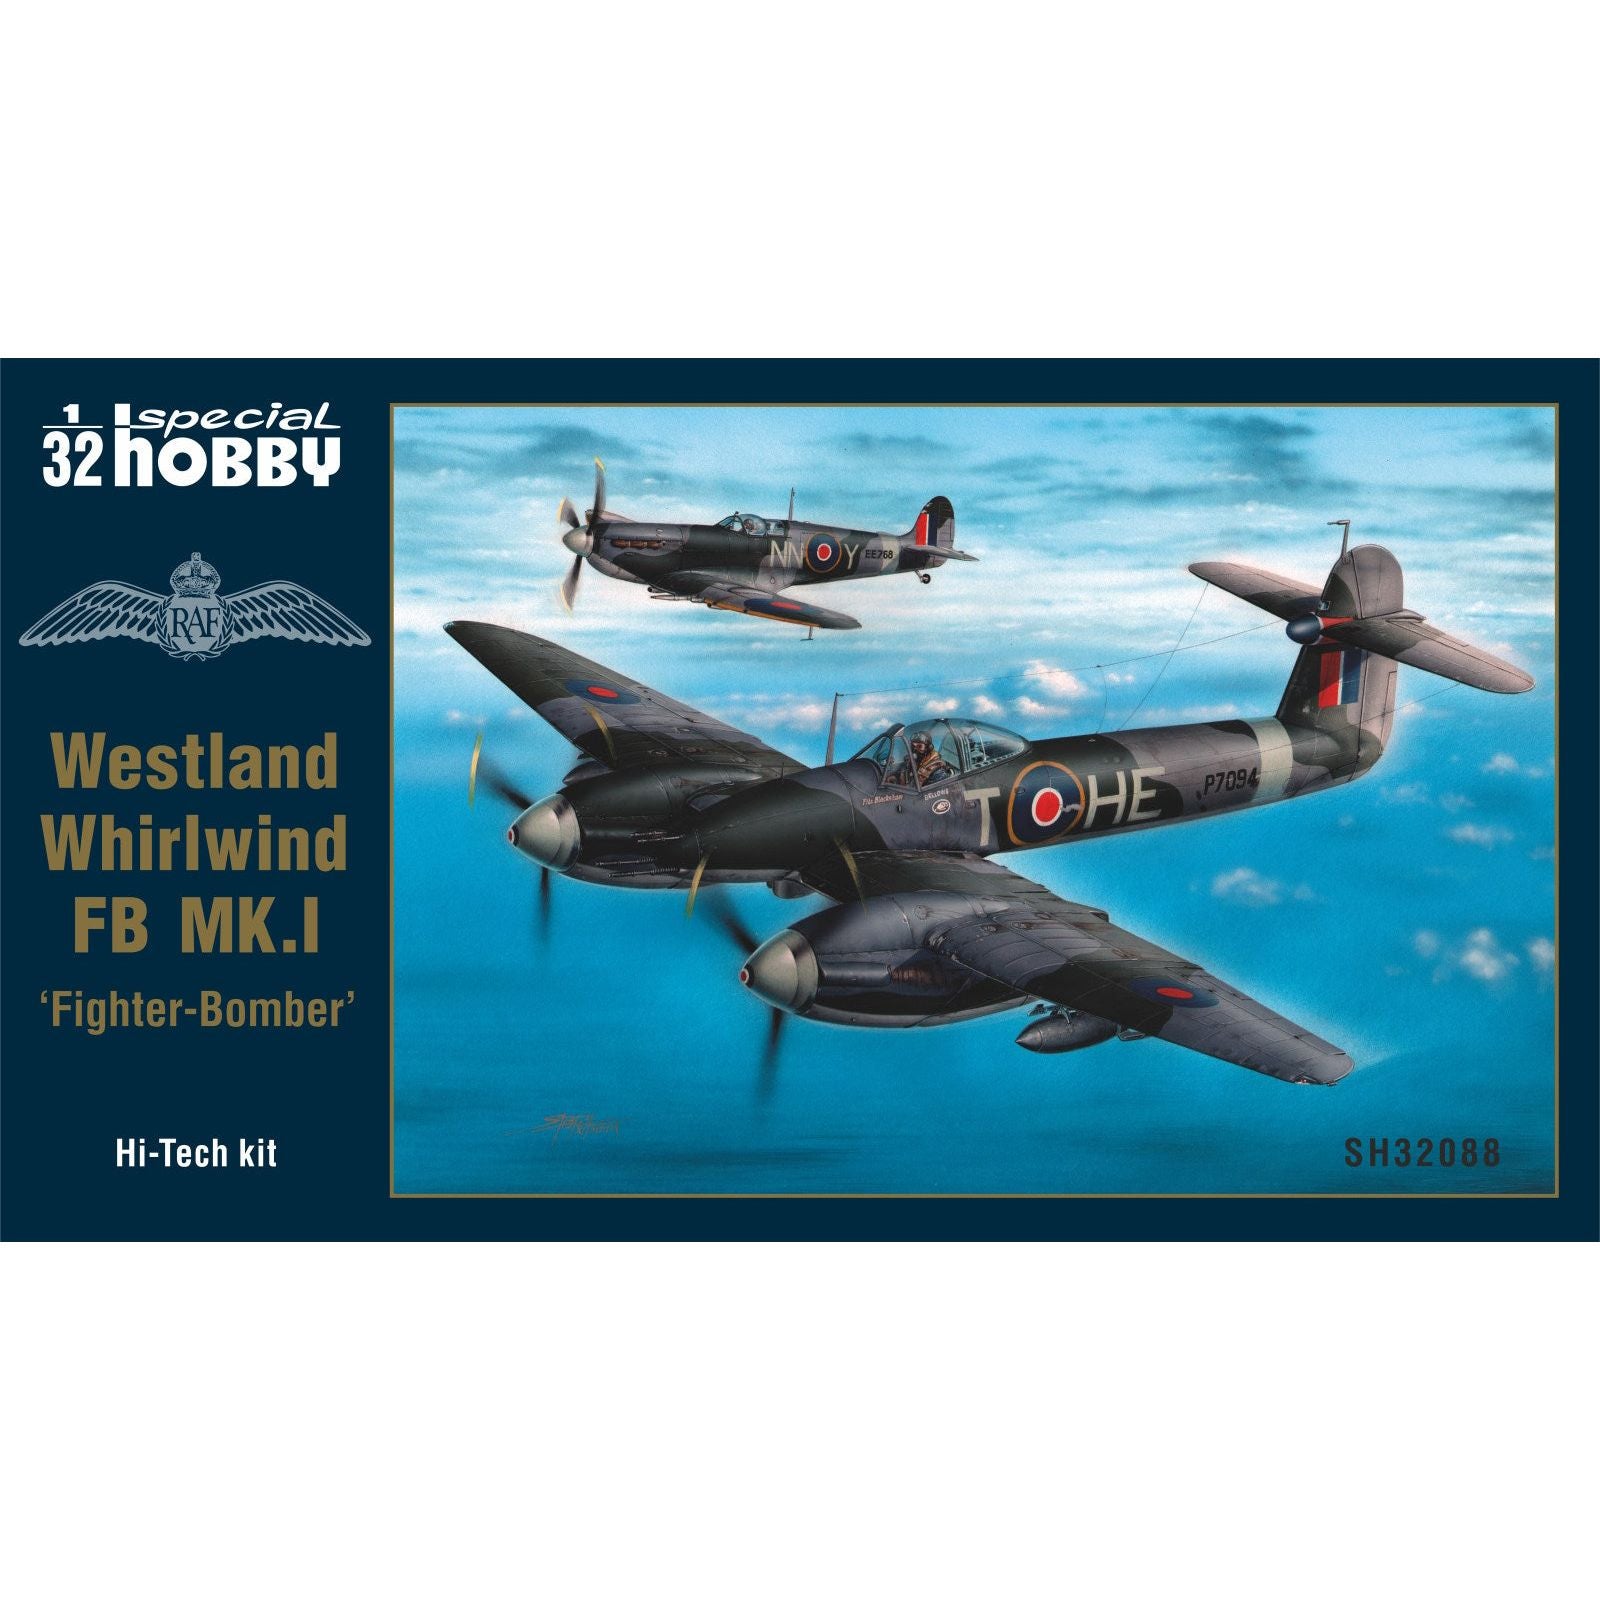 SPECIAL HOBBY 1/32 Westland Whirlwind FB MK.I ‘Fighter-Bomber’